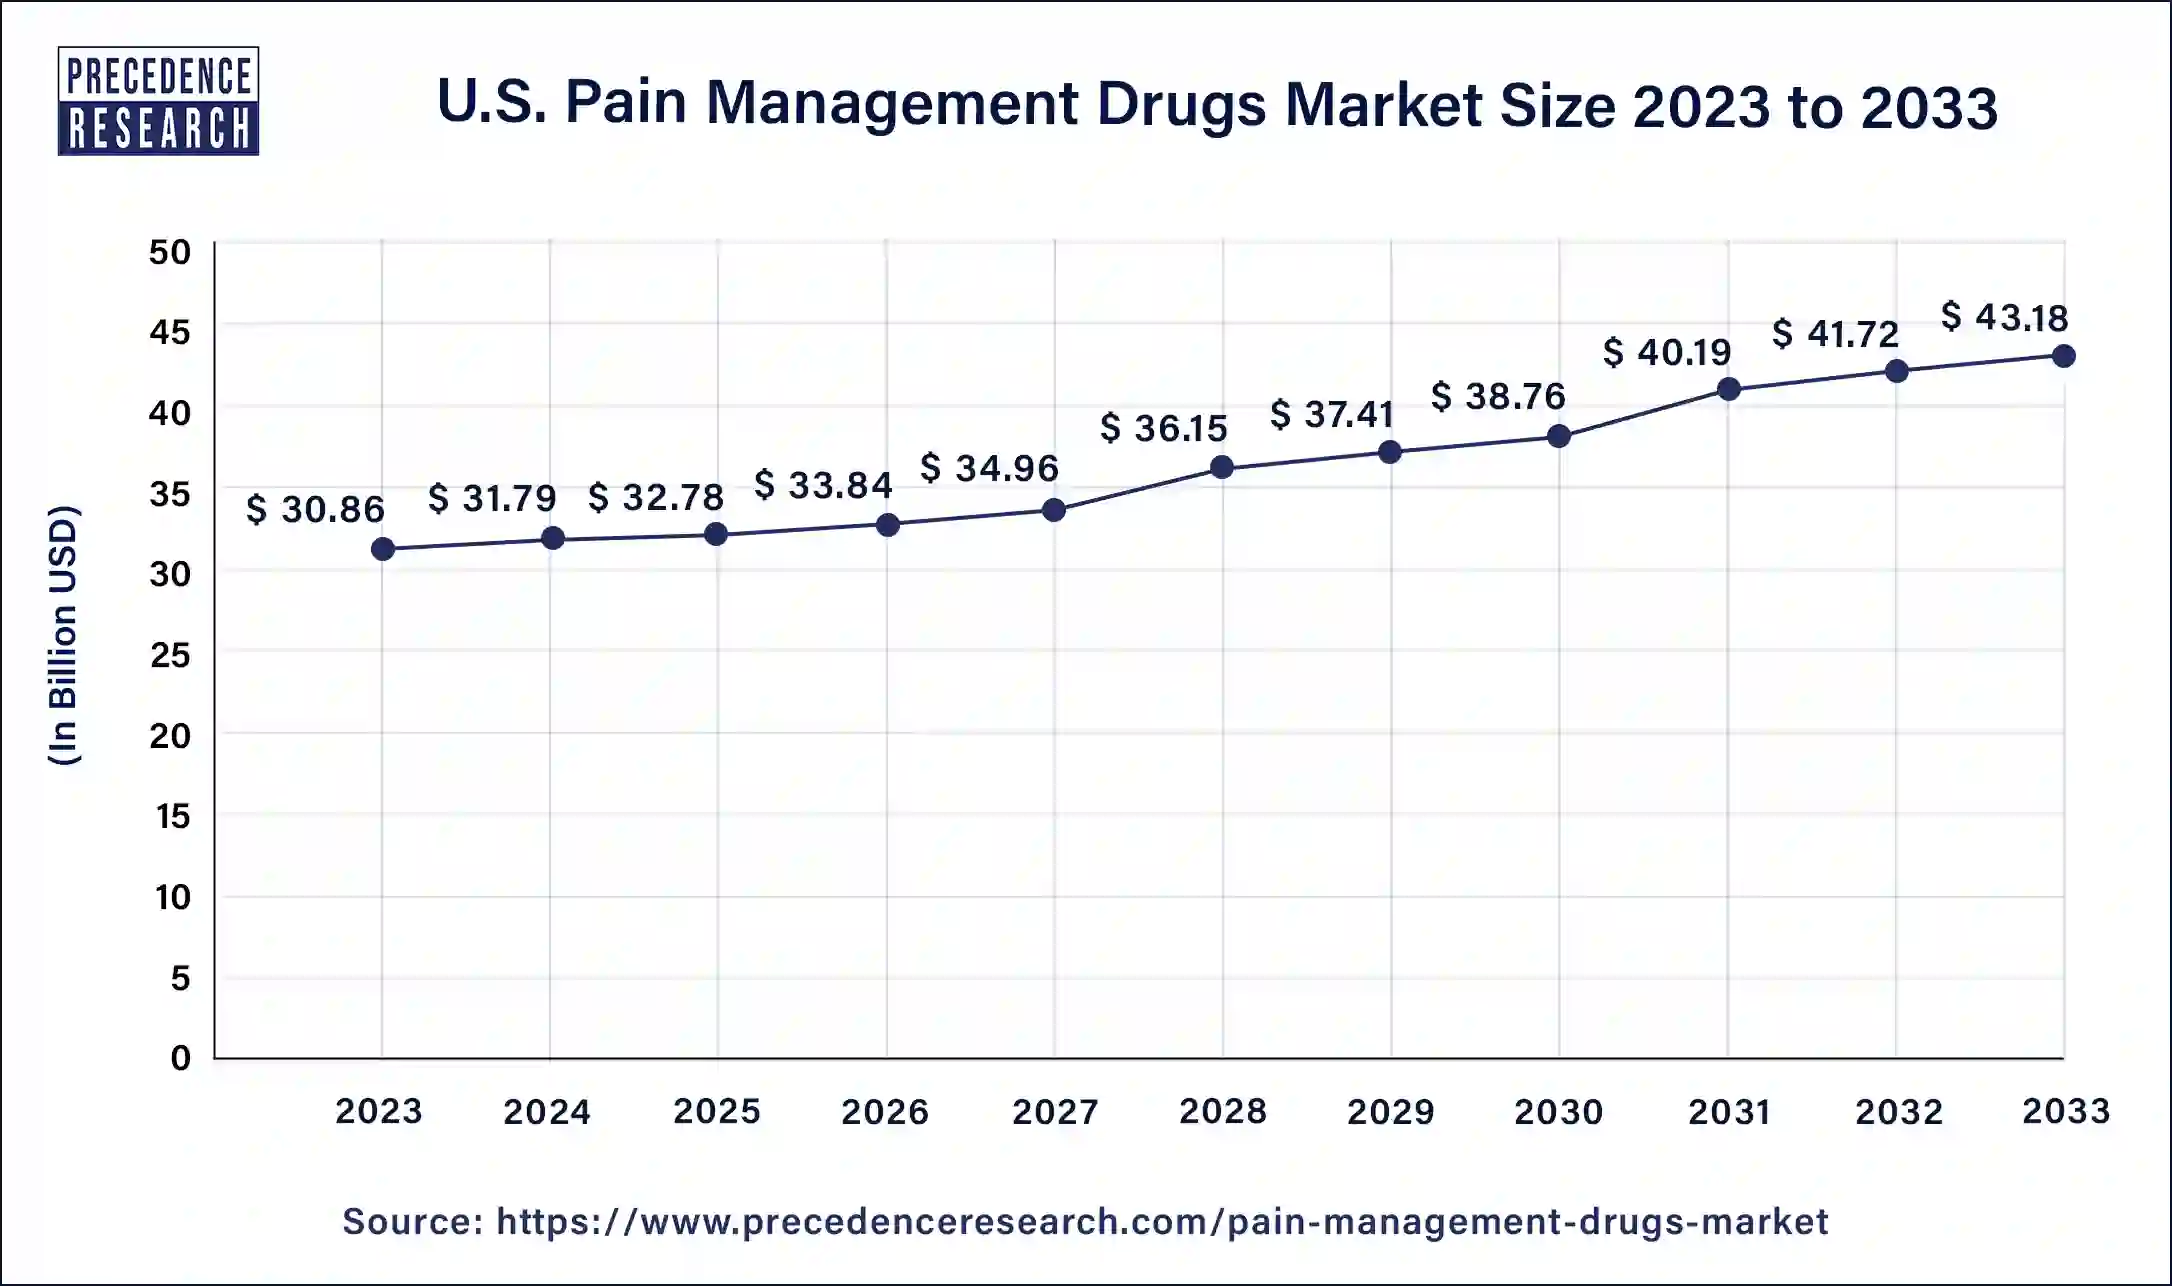 Pain Management Drugs Market Size in U.S. 2024 to 2033